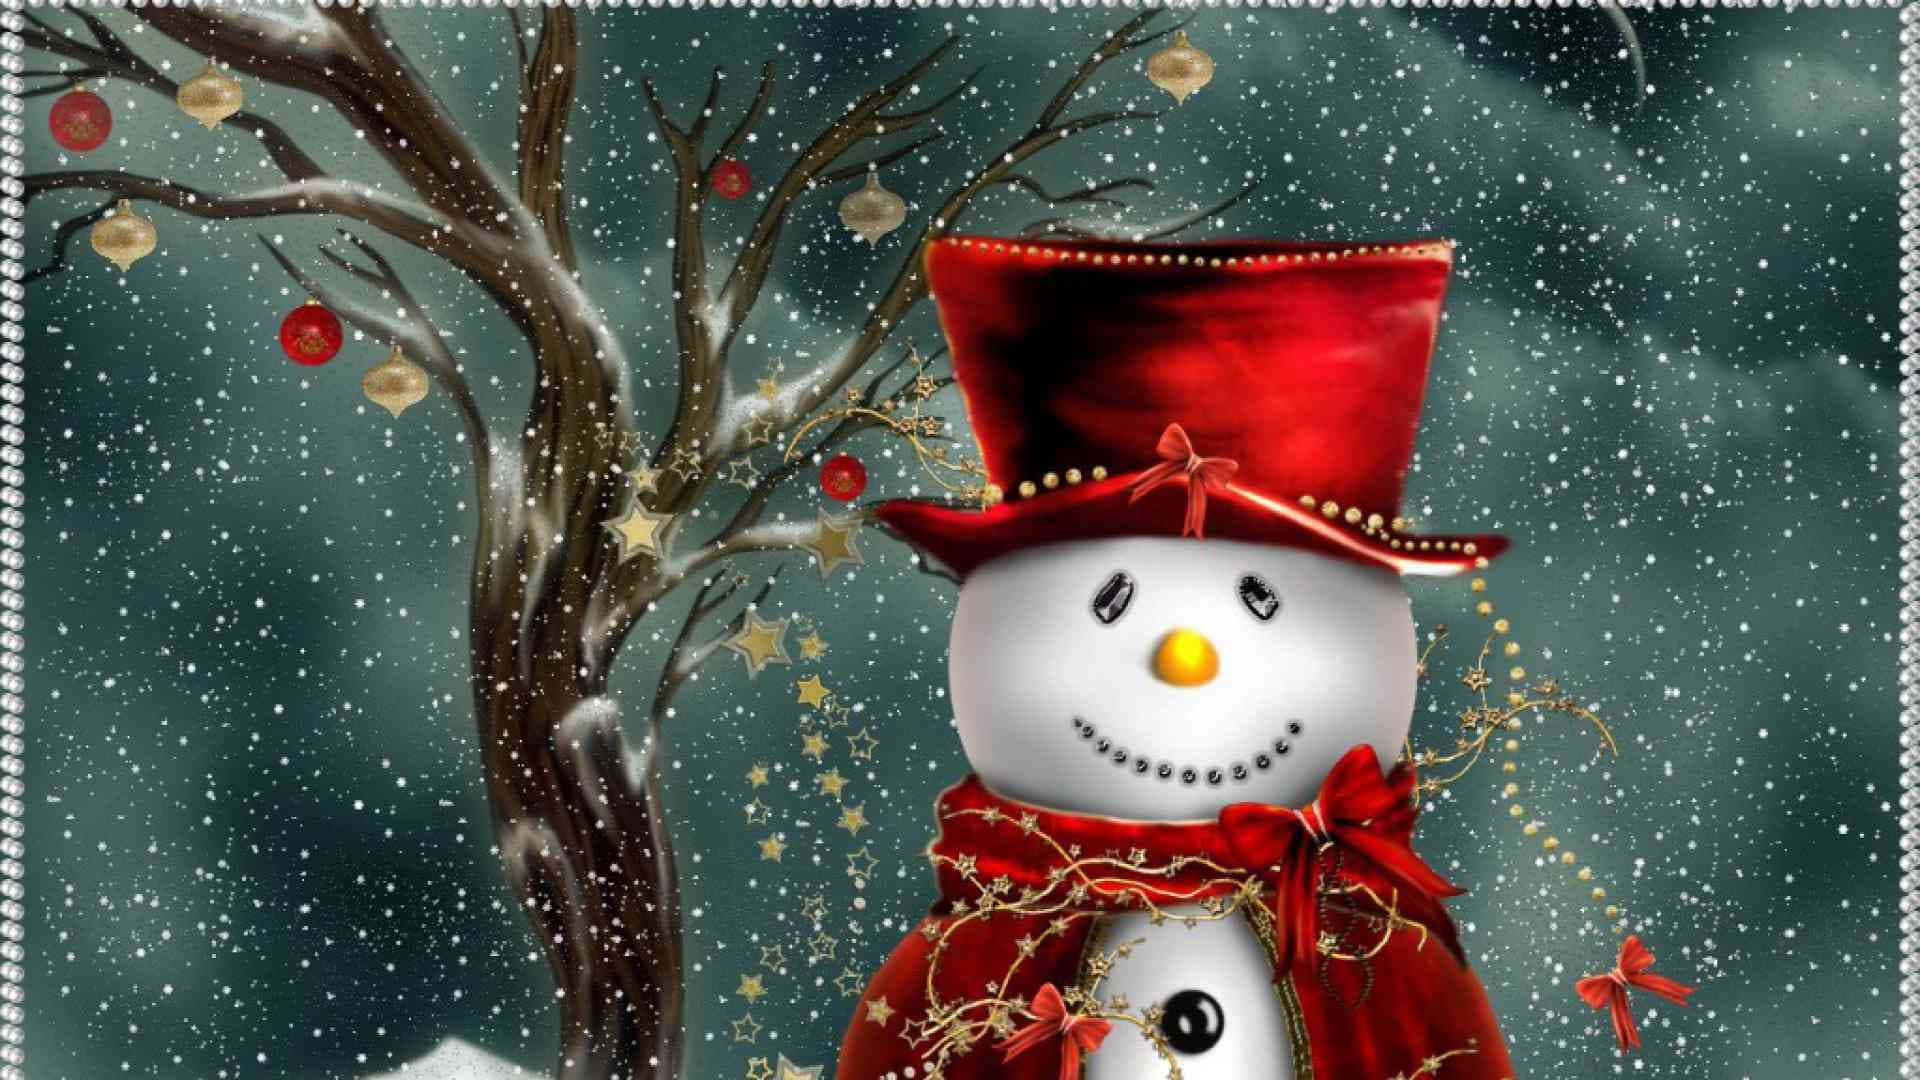 A Snowman With A Red Hat And Red Scarf